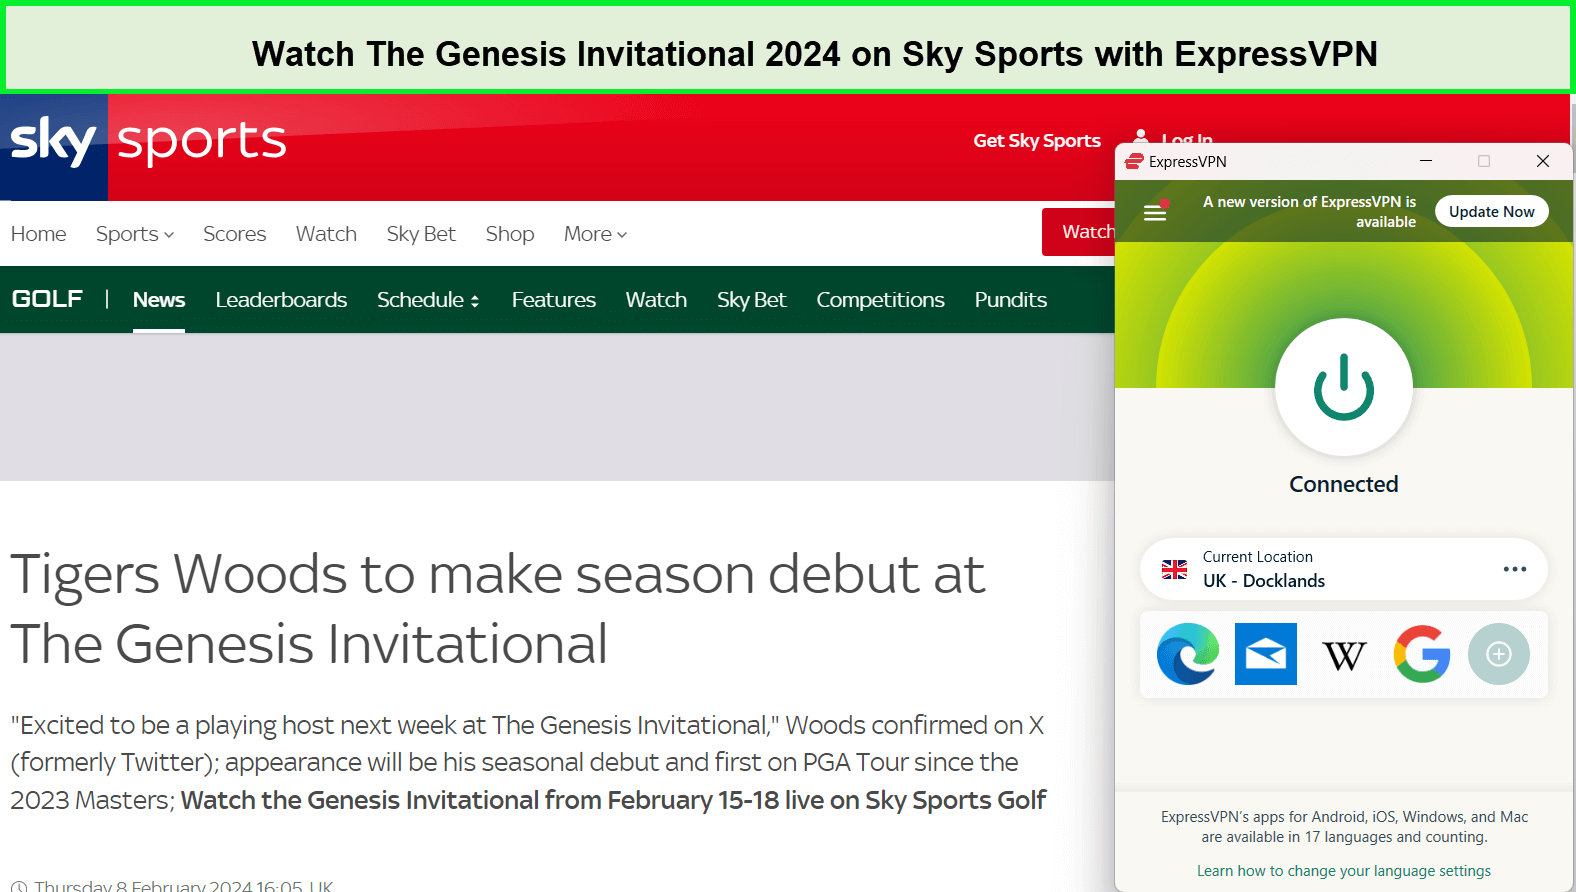 Watch The Genesis Invitational 2024 in USA on Sky Sports